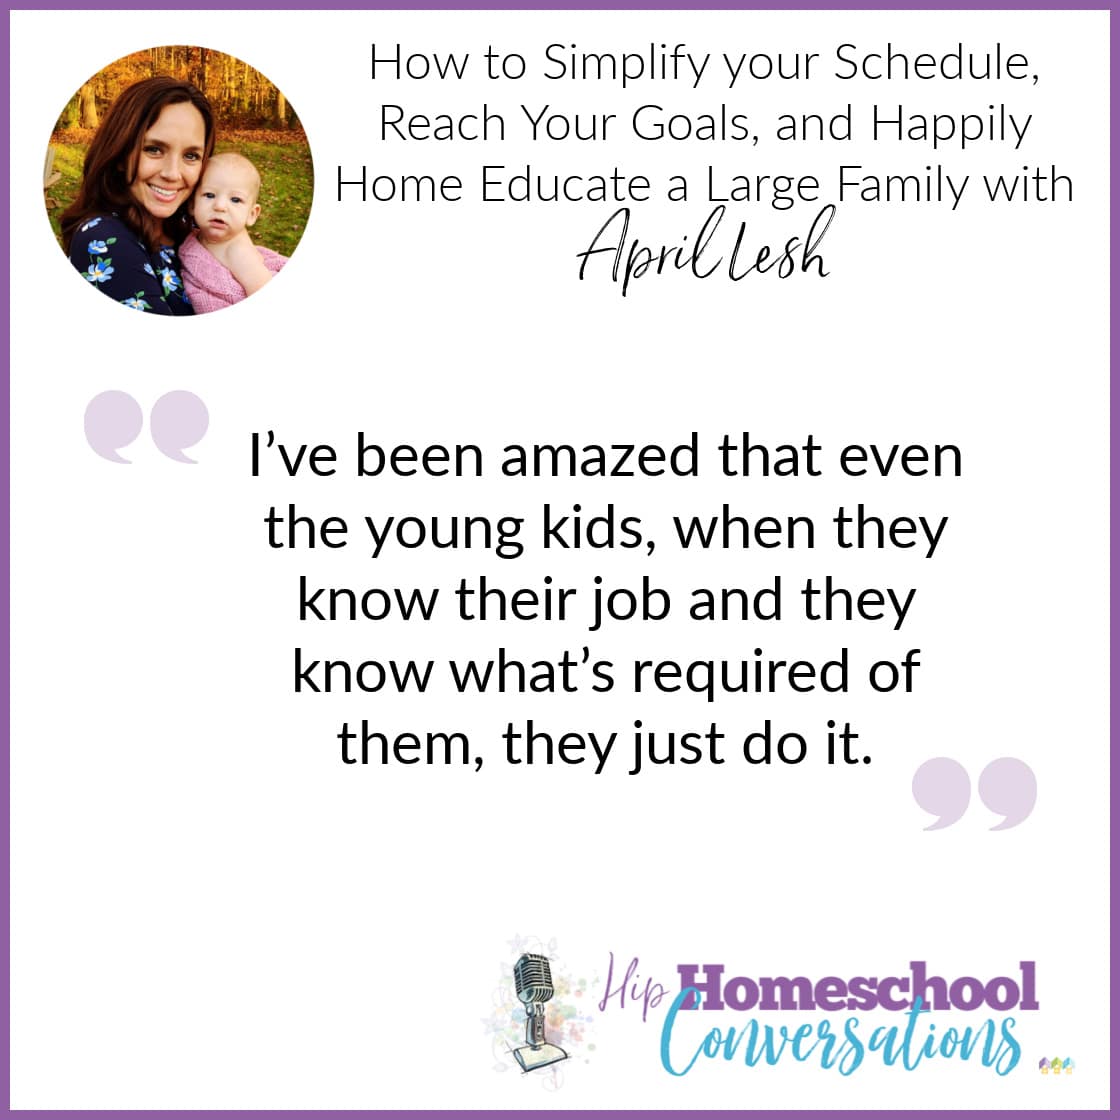 April shares her practical and thoughtful ideas regarding prioritizing her day, scheduling in a way that makes sense, and accomplishing her goal of encouraging her children to enjoy learning.